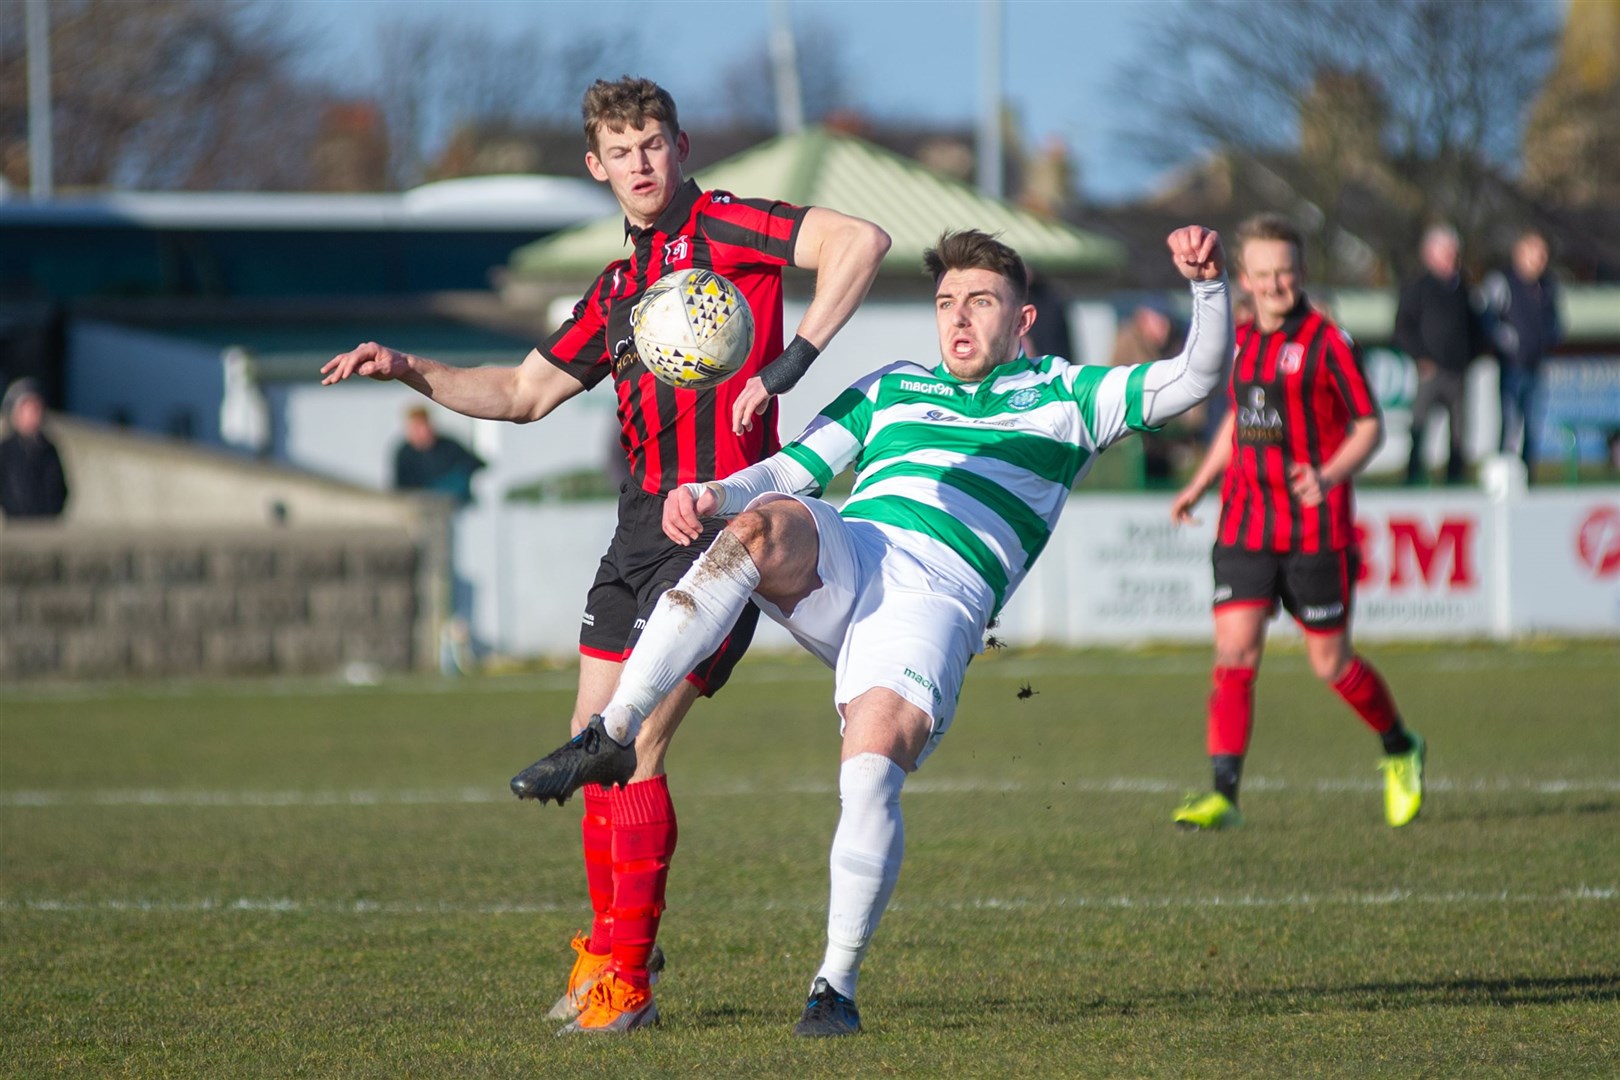 Deveronvale trialist Andy Hinter (left) scored two more goals for the Banff side in their 5-4 defeat to Nairn County. Picture: Daniel Forsyth..